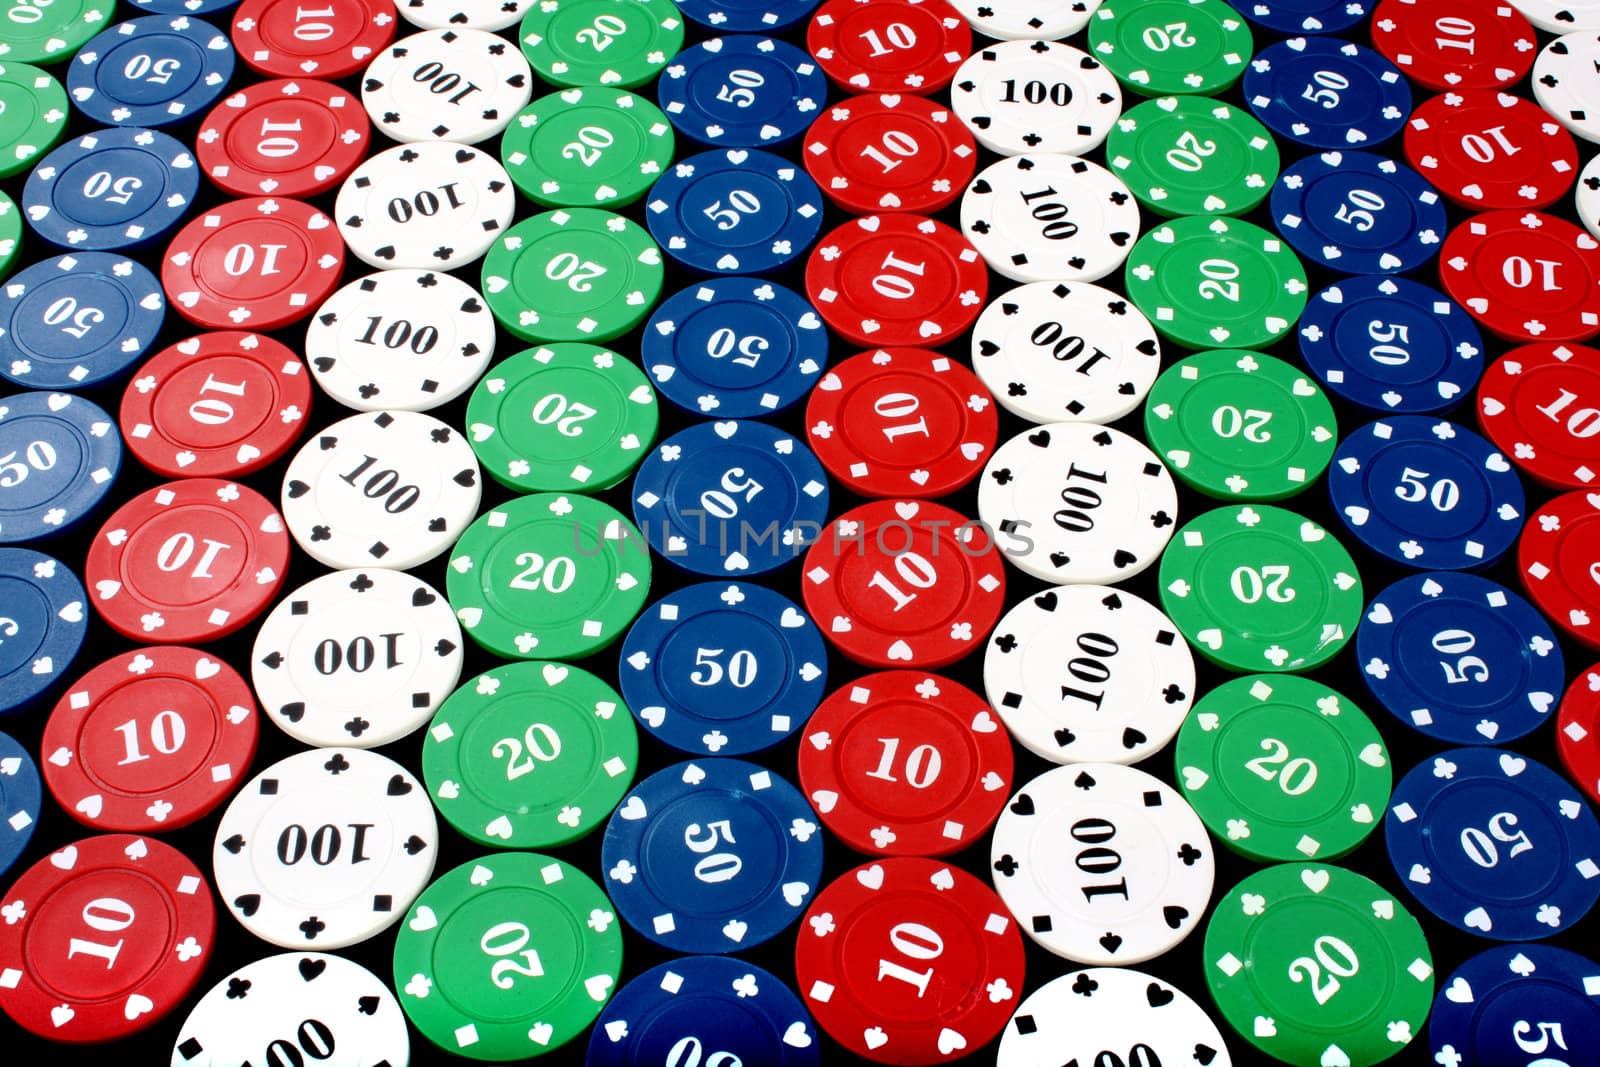 A background of colorful casino chips in a diagonal pattern.